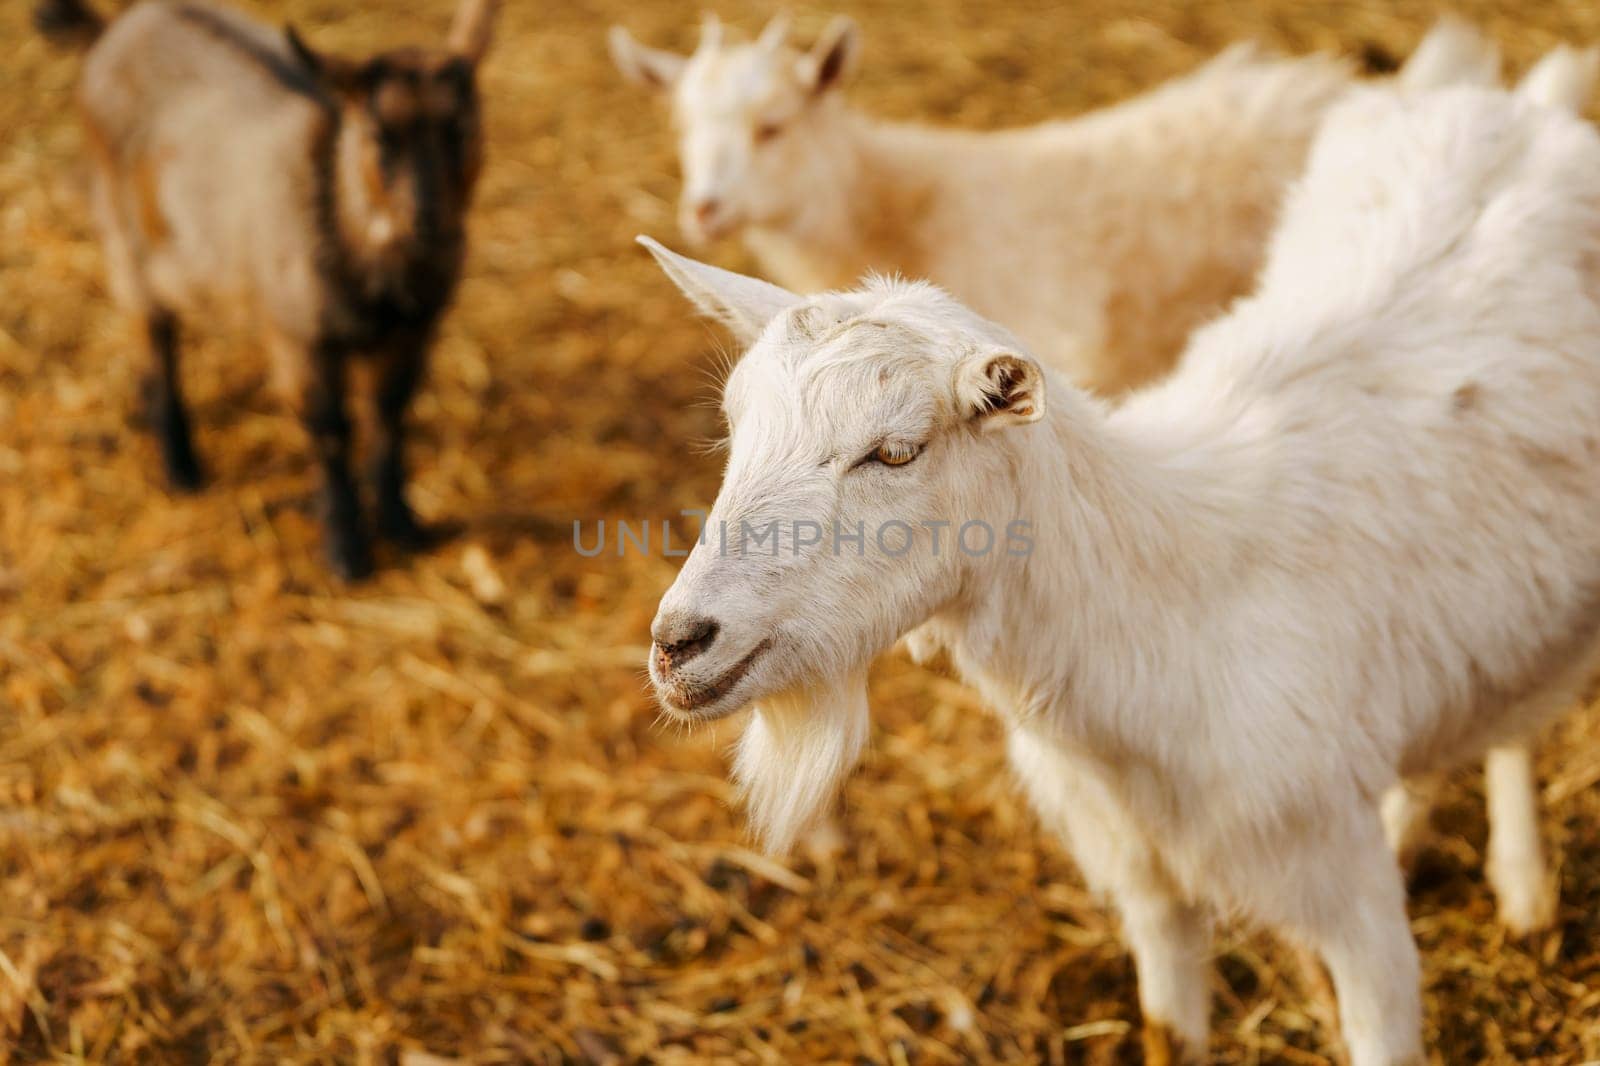 Goat stands gracefully on a tall pile of golden hay, surveying its surroundings with curiosity and poise. by darksoul72